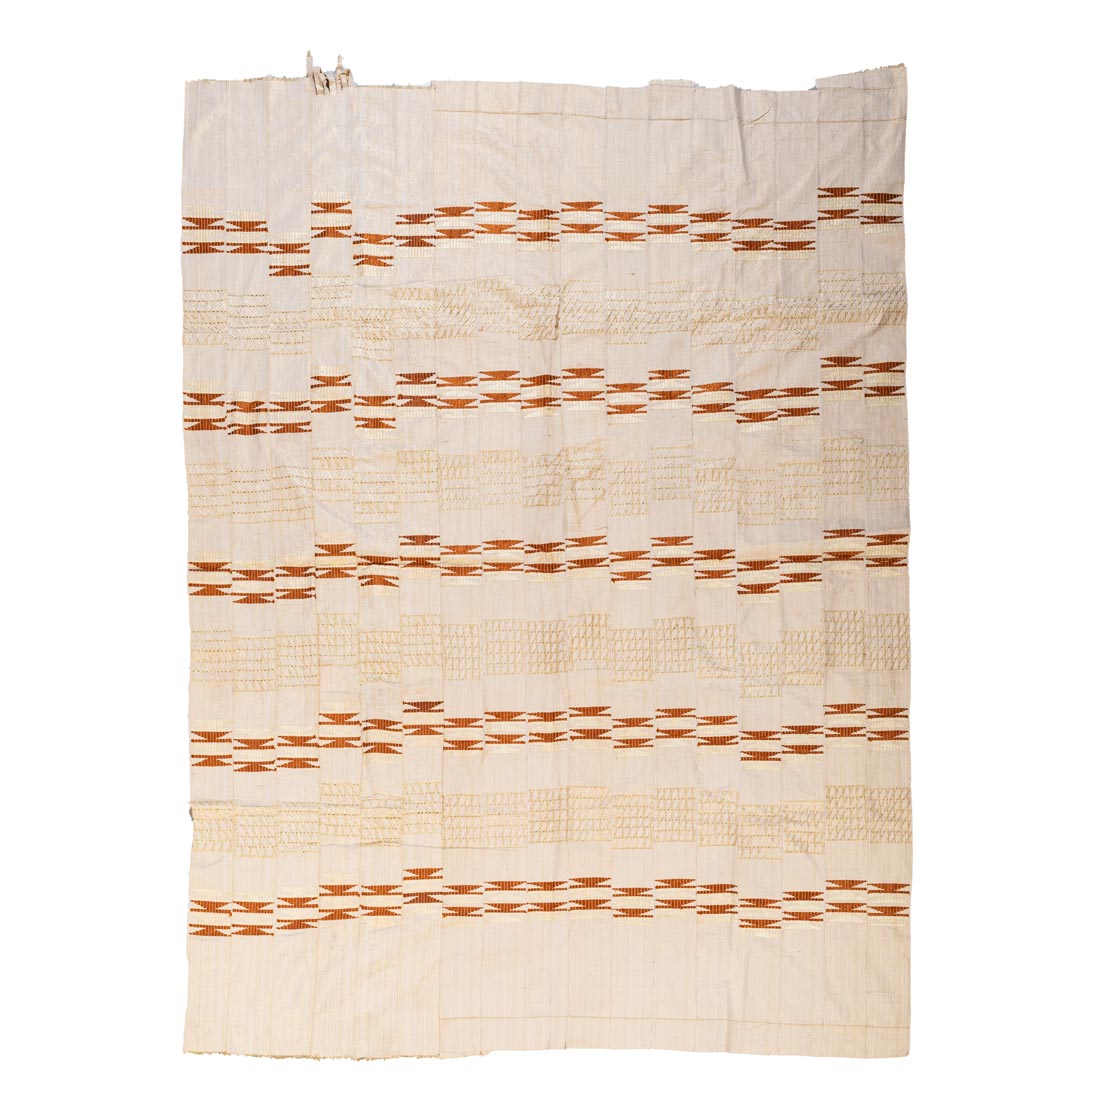 NARROW WEAVE TEXTILE, GHANA Factory-made textile referencing traditional narrow strip weaving, large